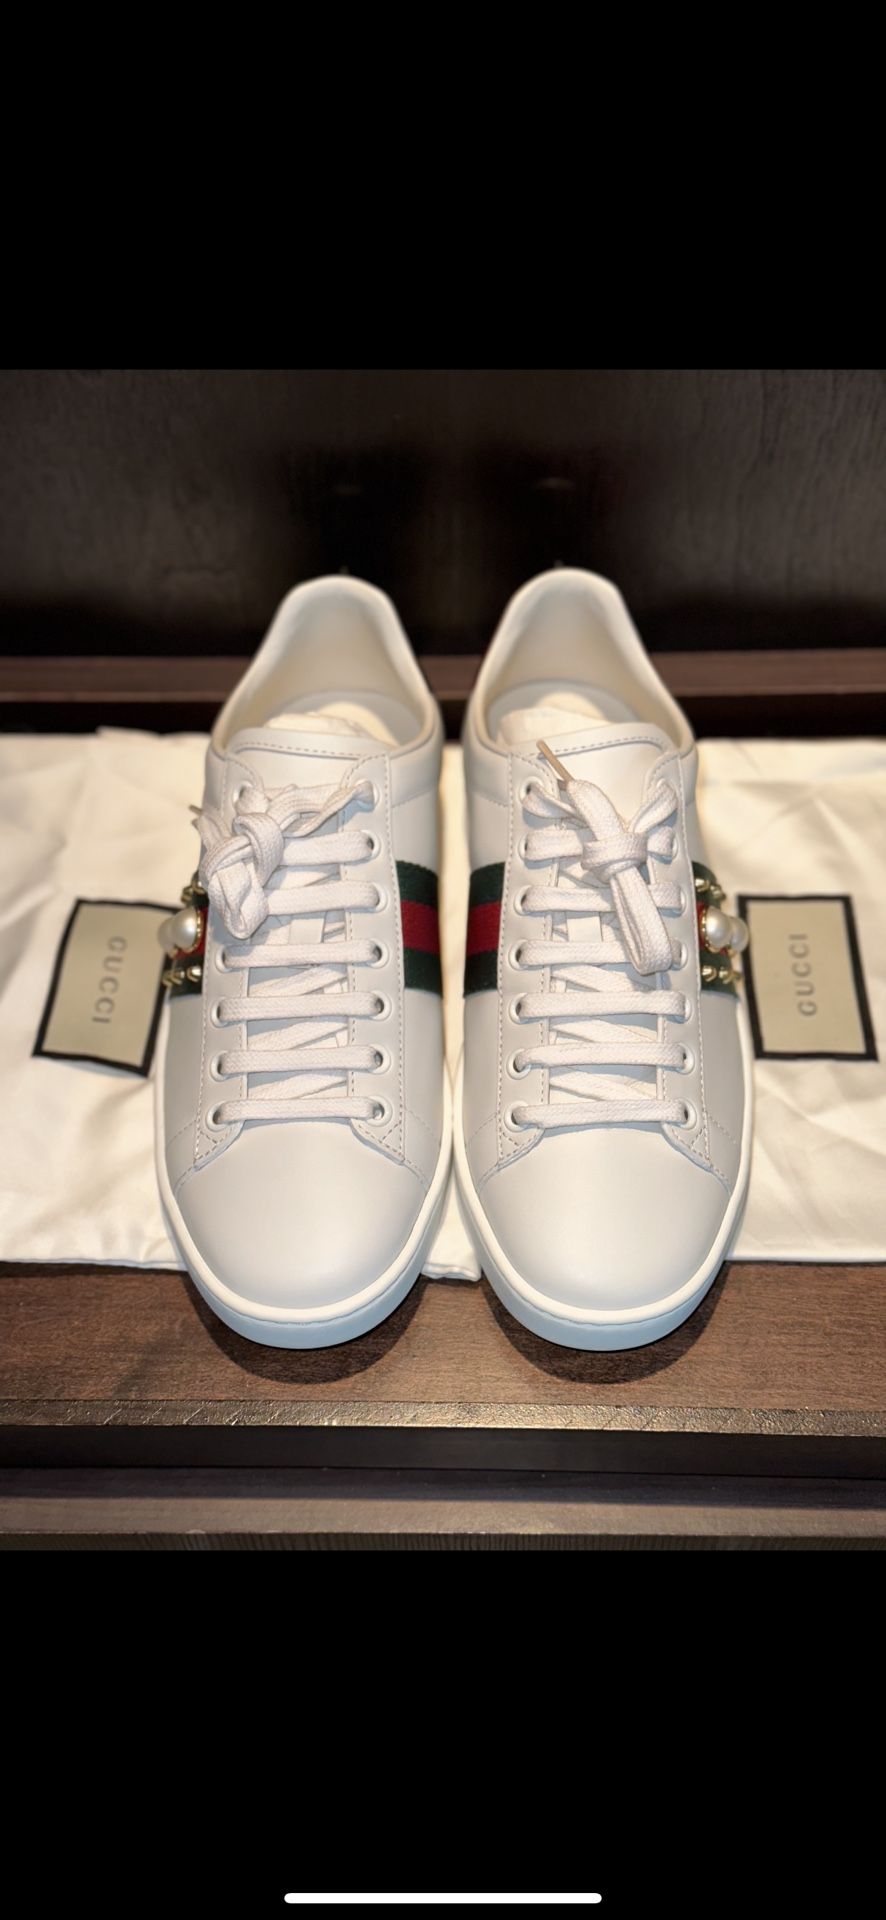 Gucci Pearl Studded Tennis Shoes 